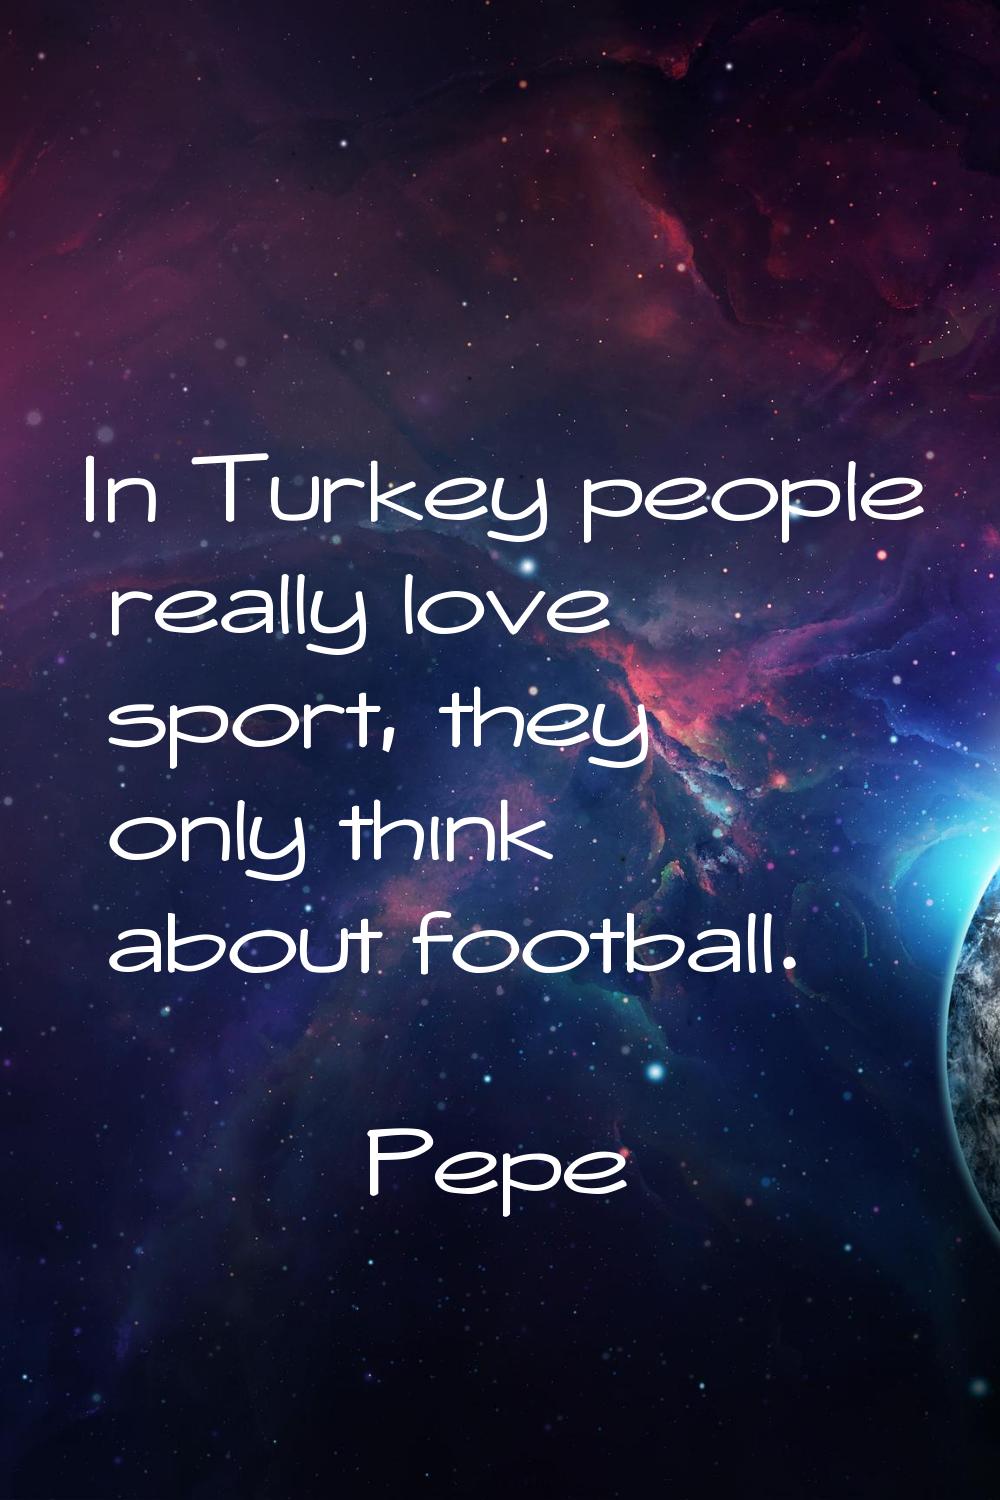 In Turkey people really love sport, they only think about football.